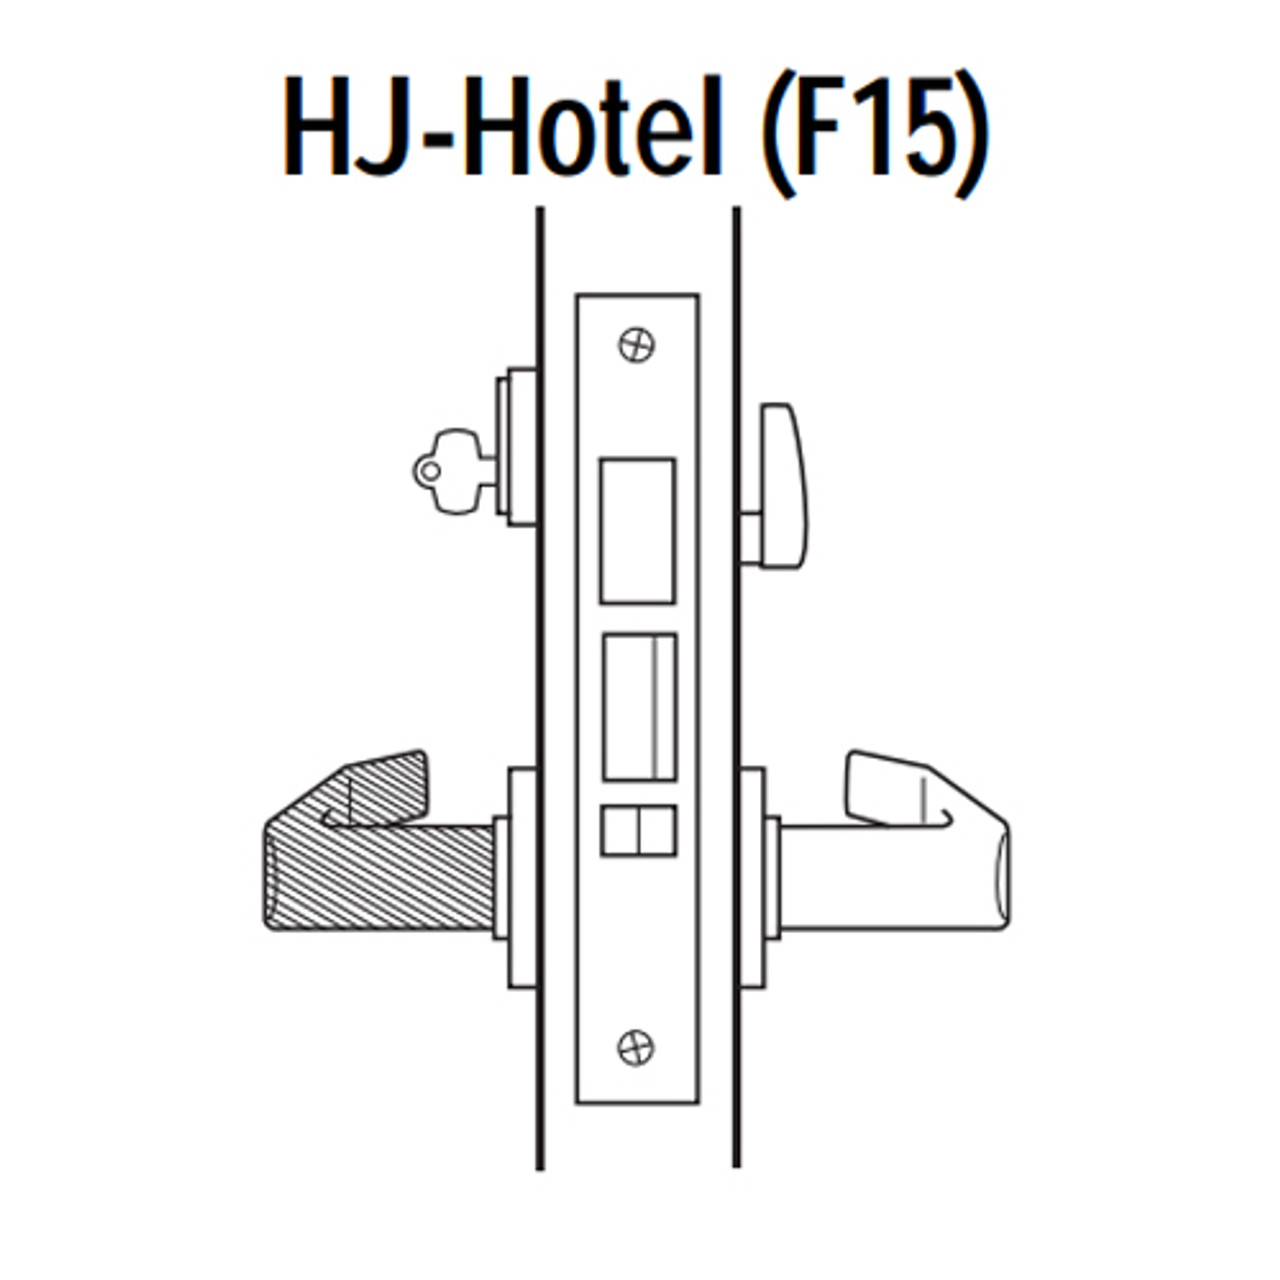 45H7HJ17LH613 Best 40H Series Hotel with Deadbolt Heavy Duty Mortise Lever Lock with Gull Wing LH in Oil Rubbed Bronze